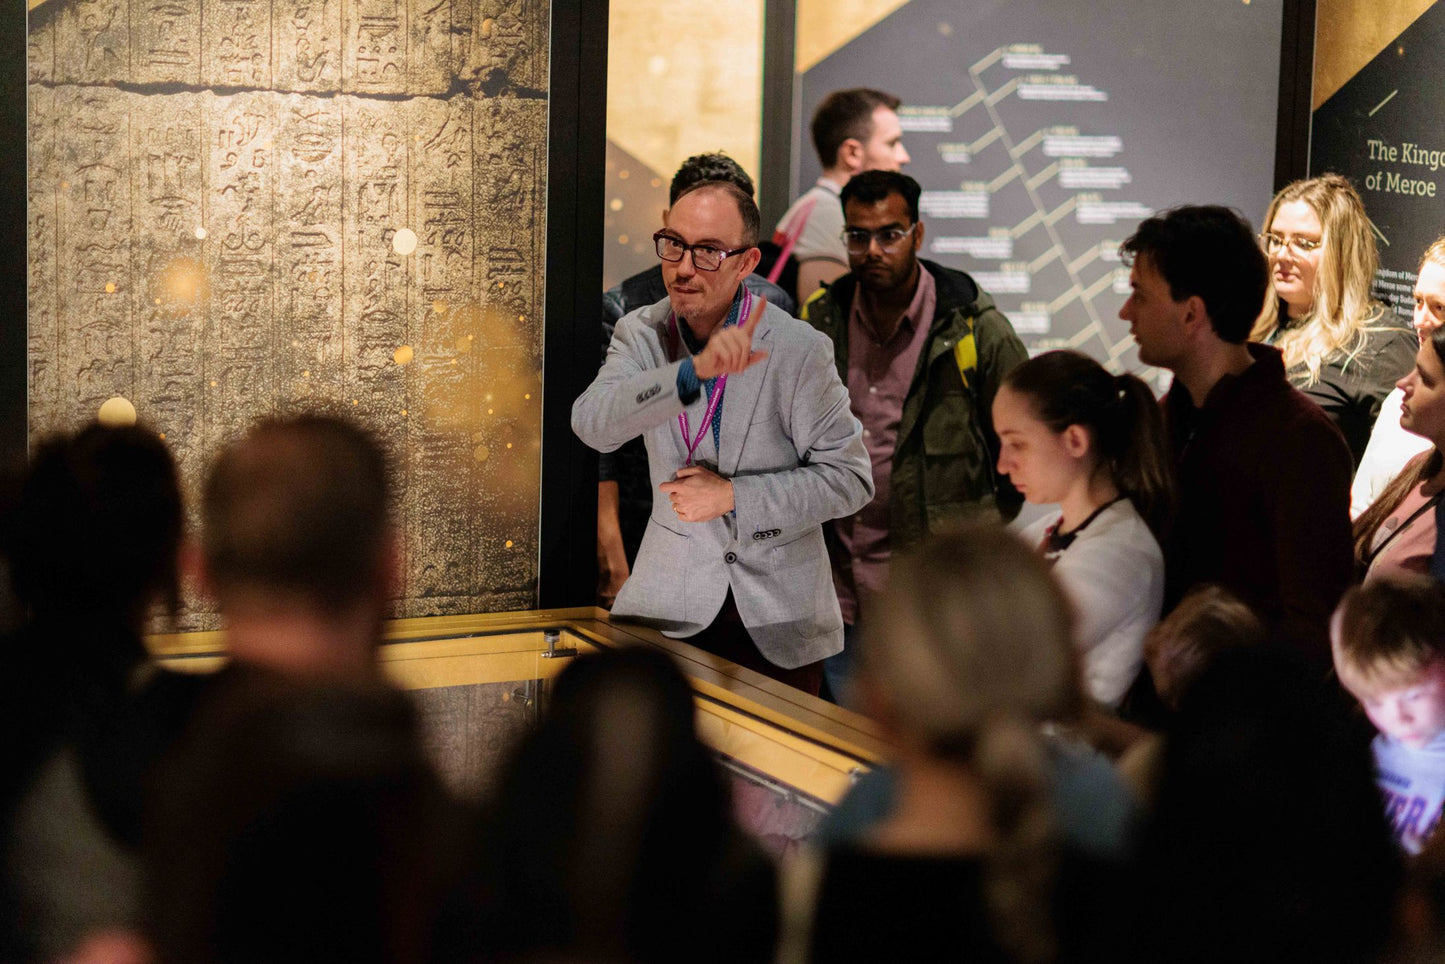 Tour photo of Dr Campbell Price during a presentation in the golden mummies exhibition with people standing around him.